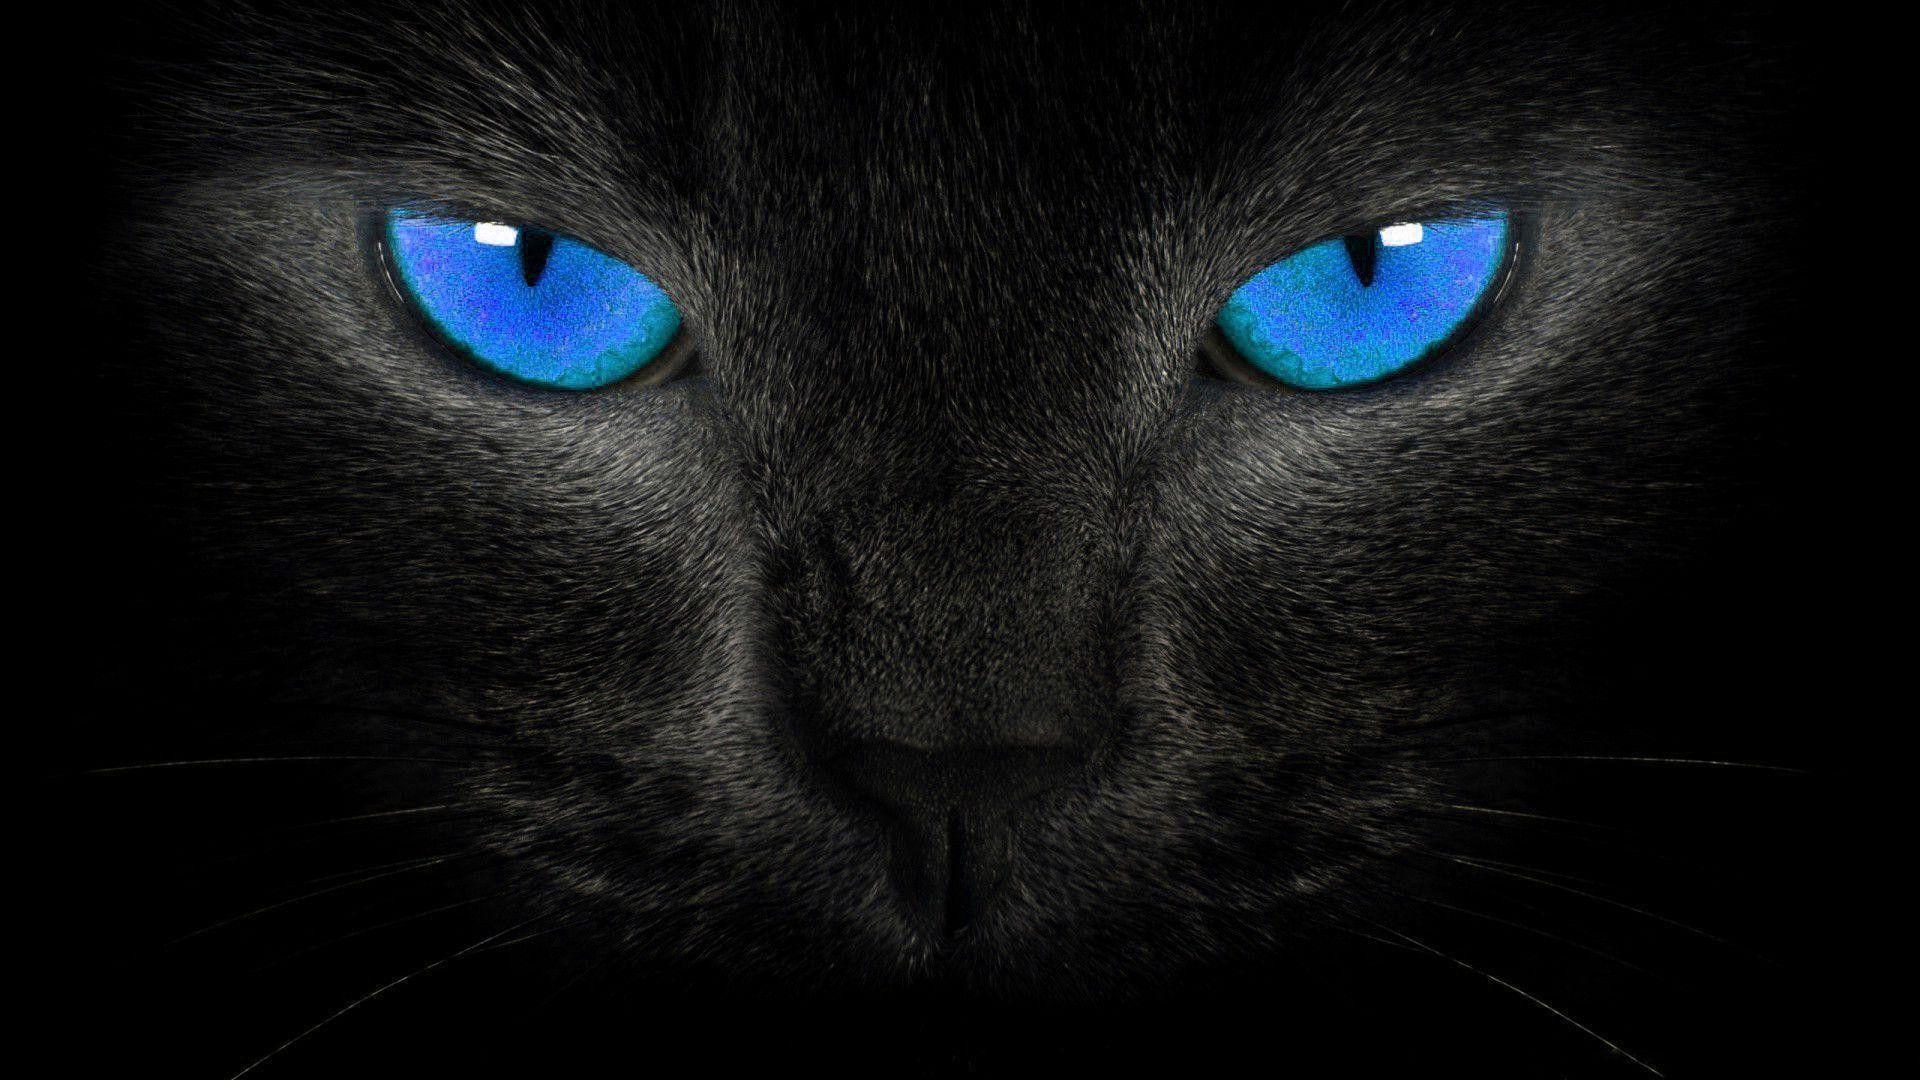 Black Cats with Blue Eyes Wallpaper